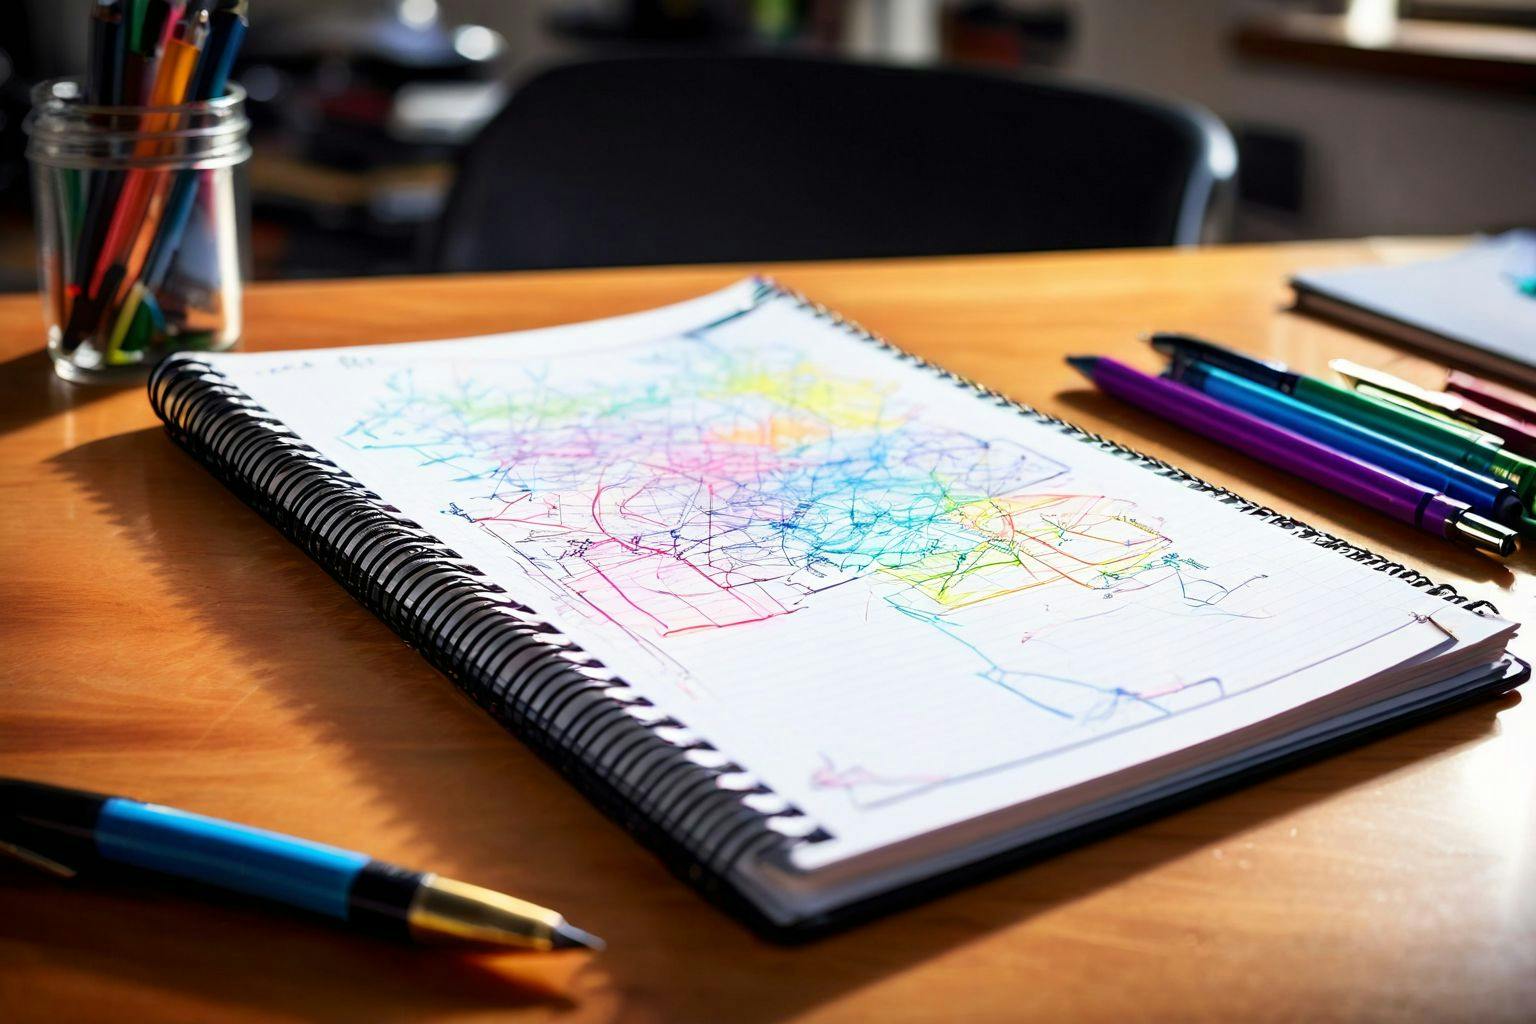 Close-up of a detailed outline on a notepad with colorful markers and notes, emphasizing the structured approach to writing, in a well-lit workspace, Photographic, Photography with a sharp focus lens capturing the details of the outline.